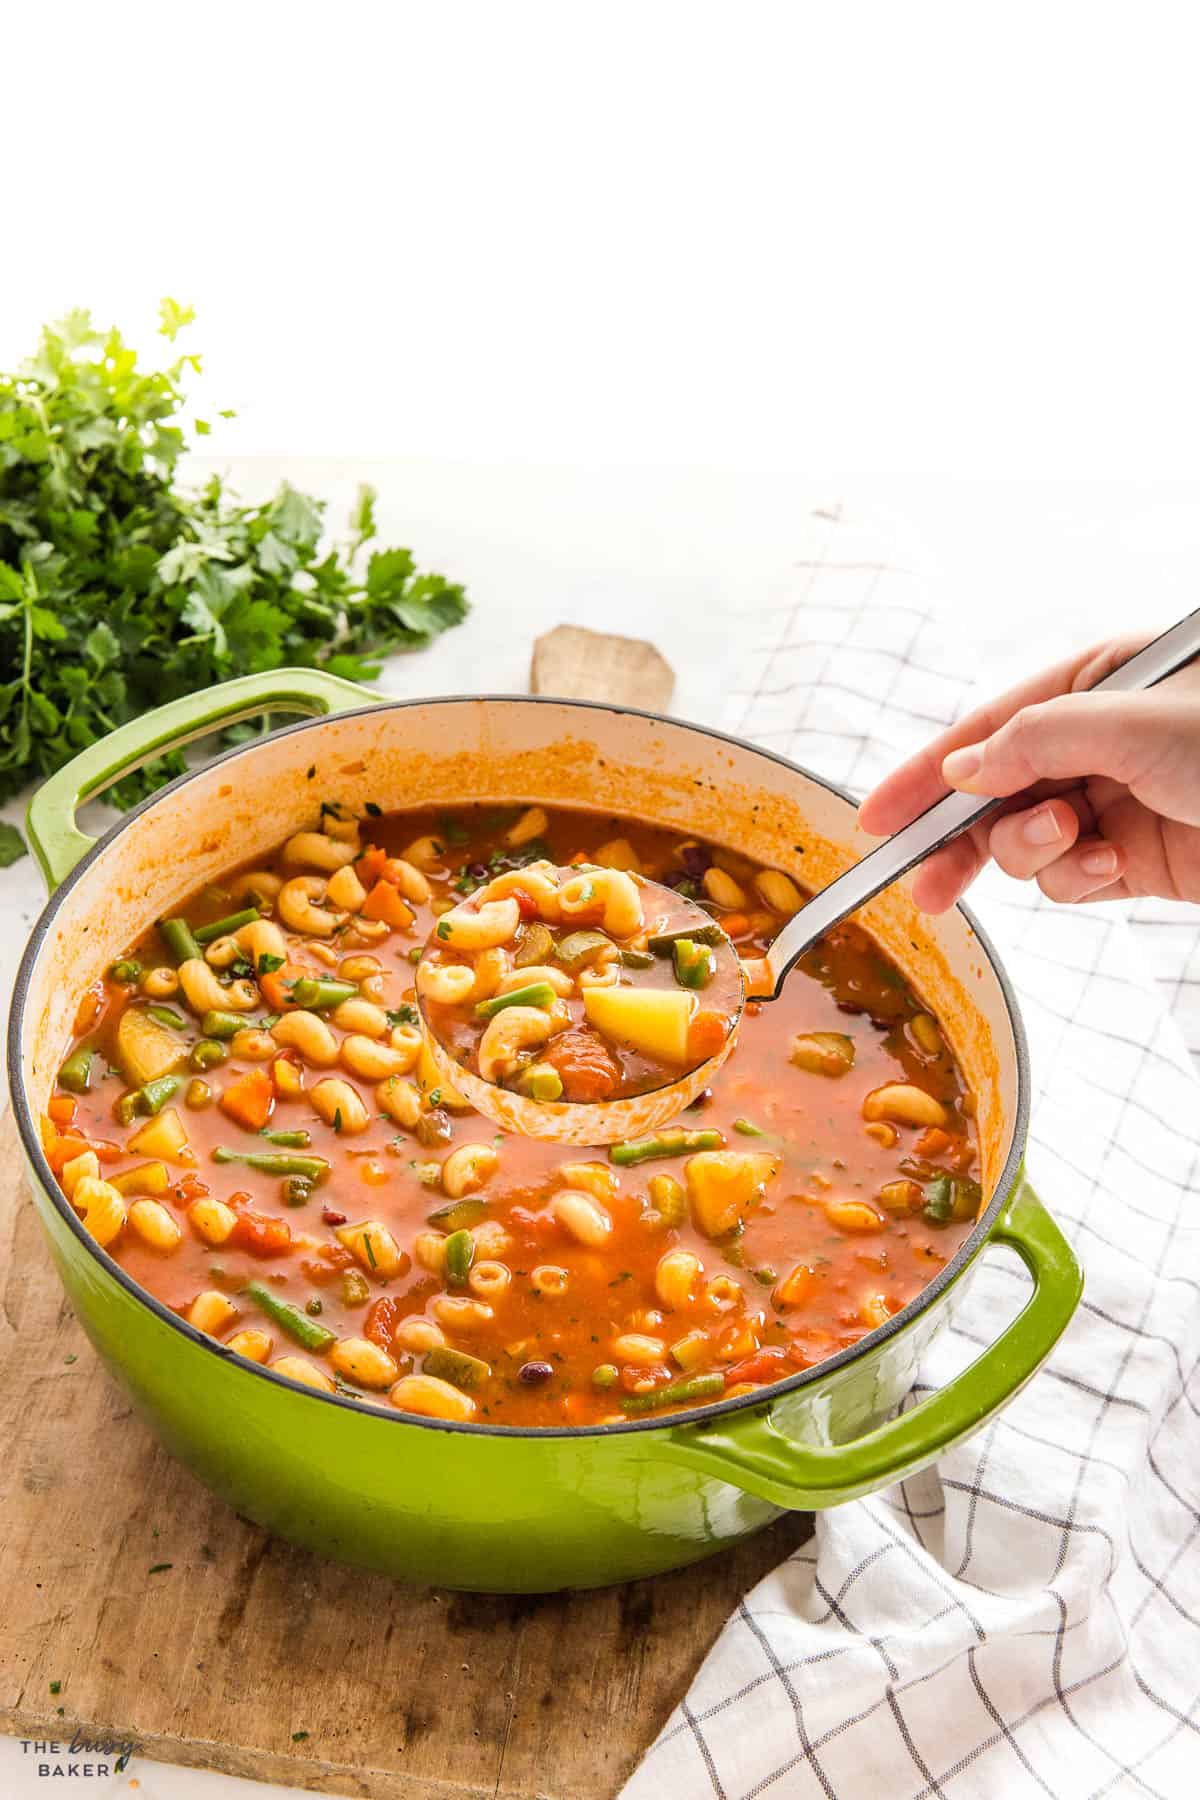 hand serving minestrone soup from a green pot